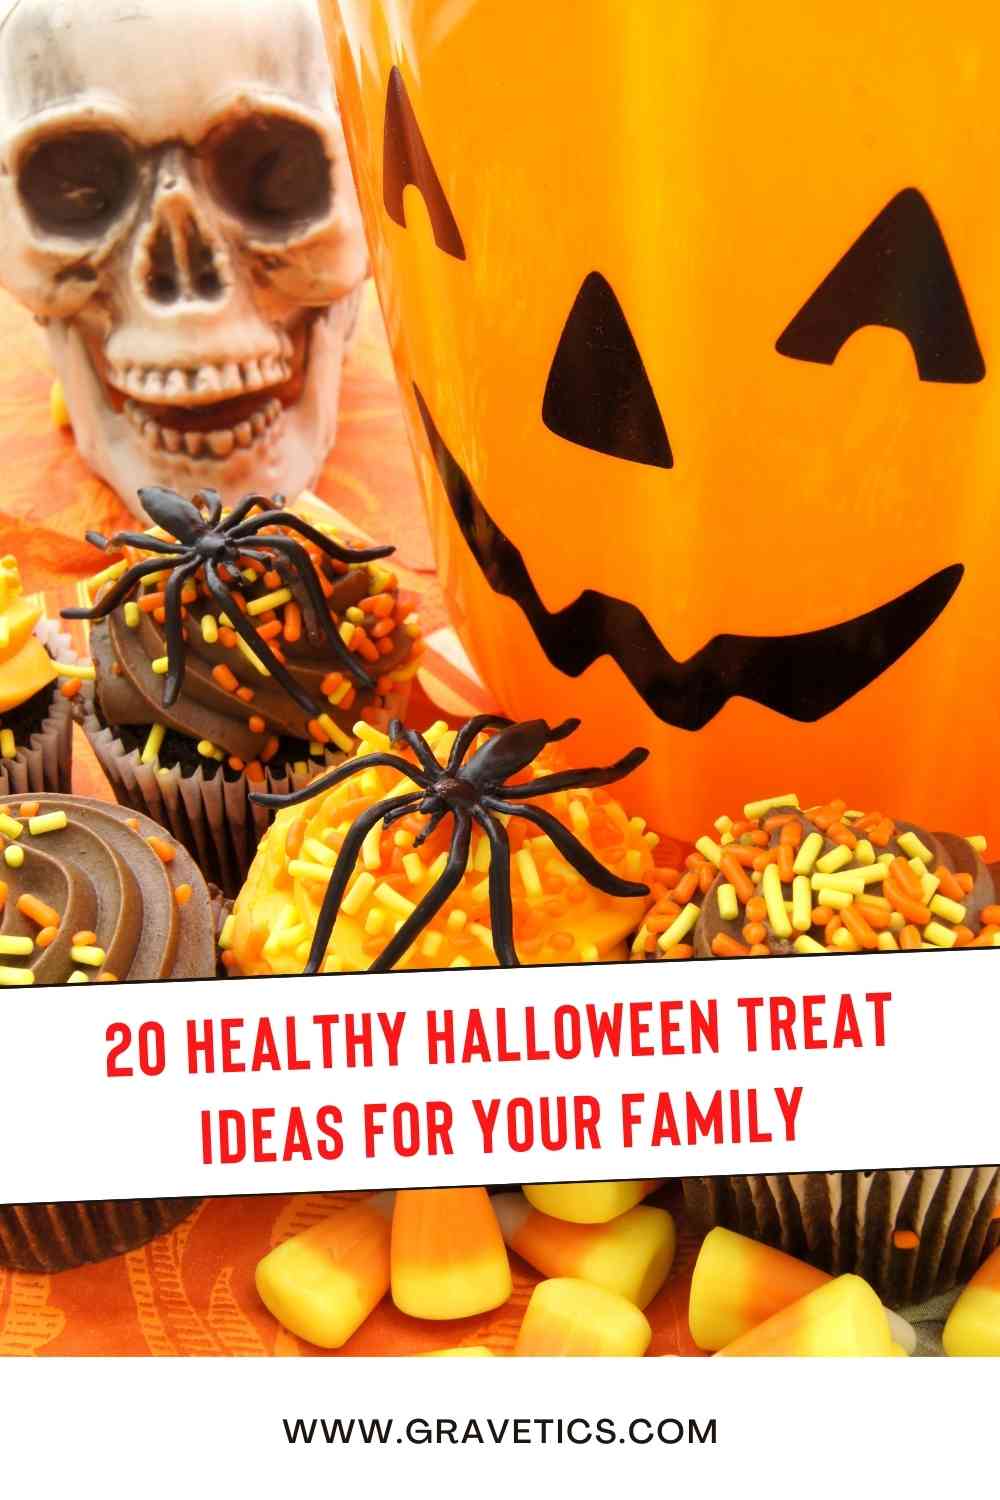 20 Healthy Halloween Treat Ideas For Your Family